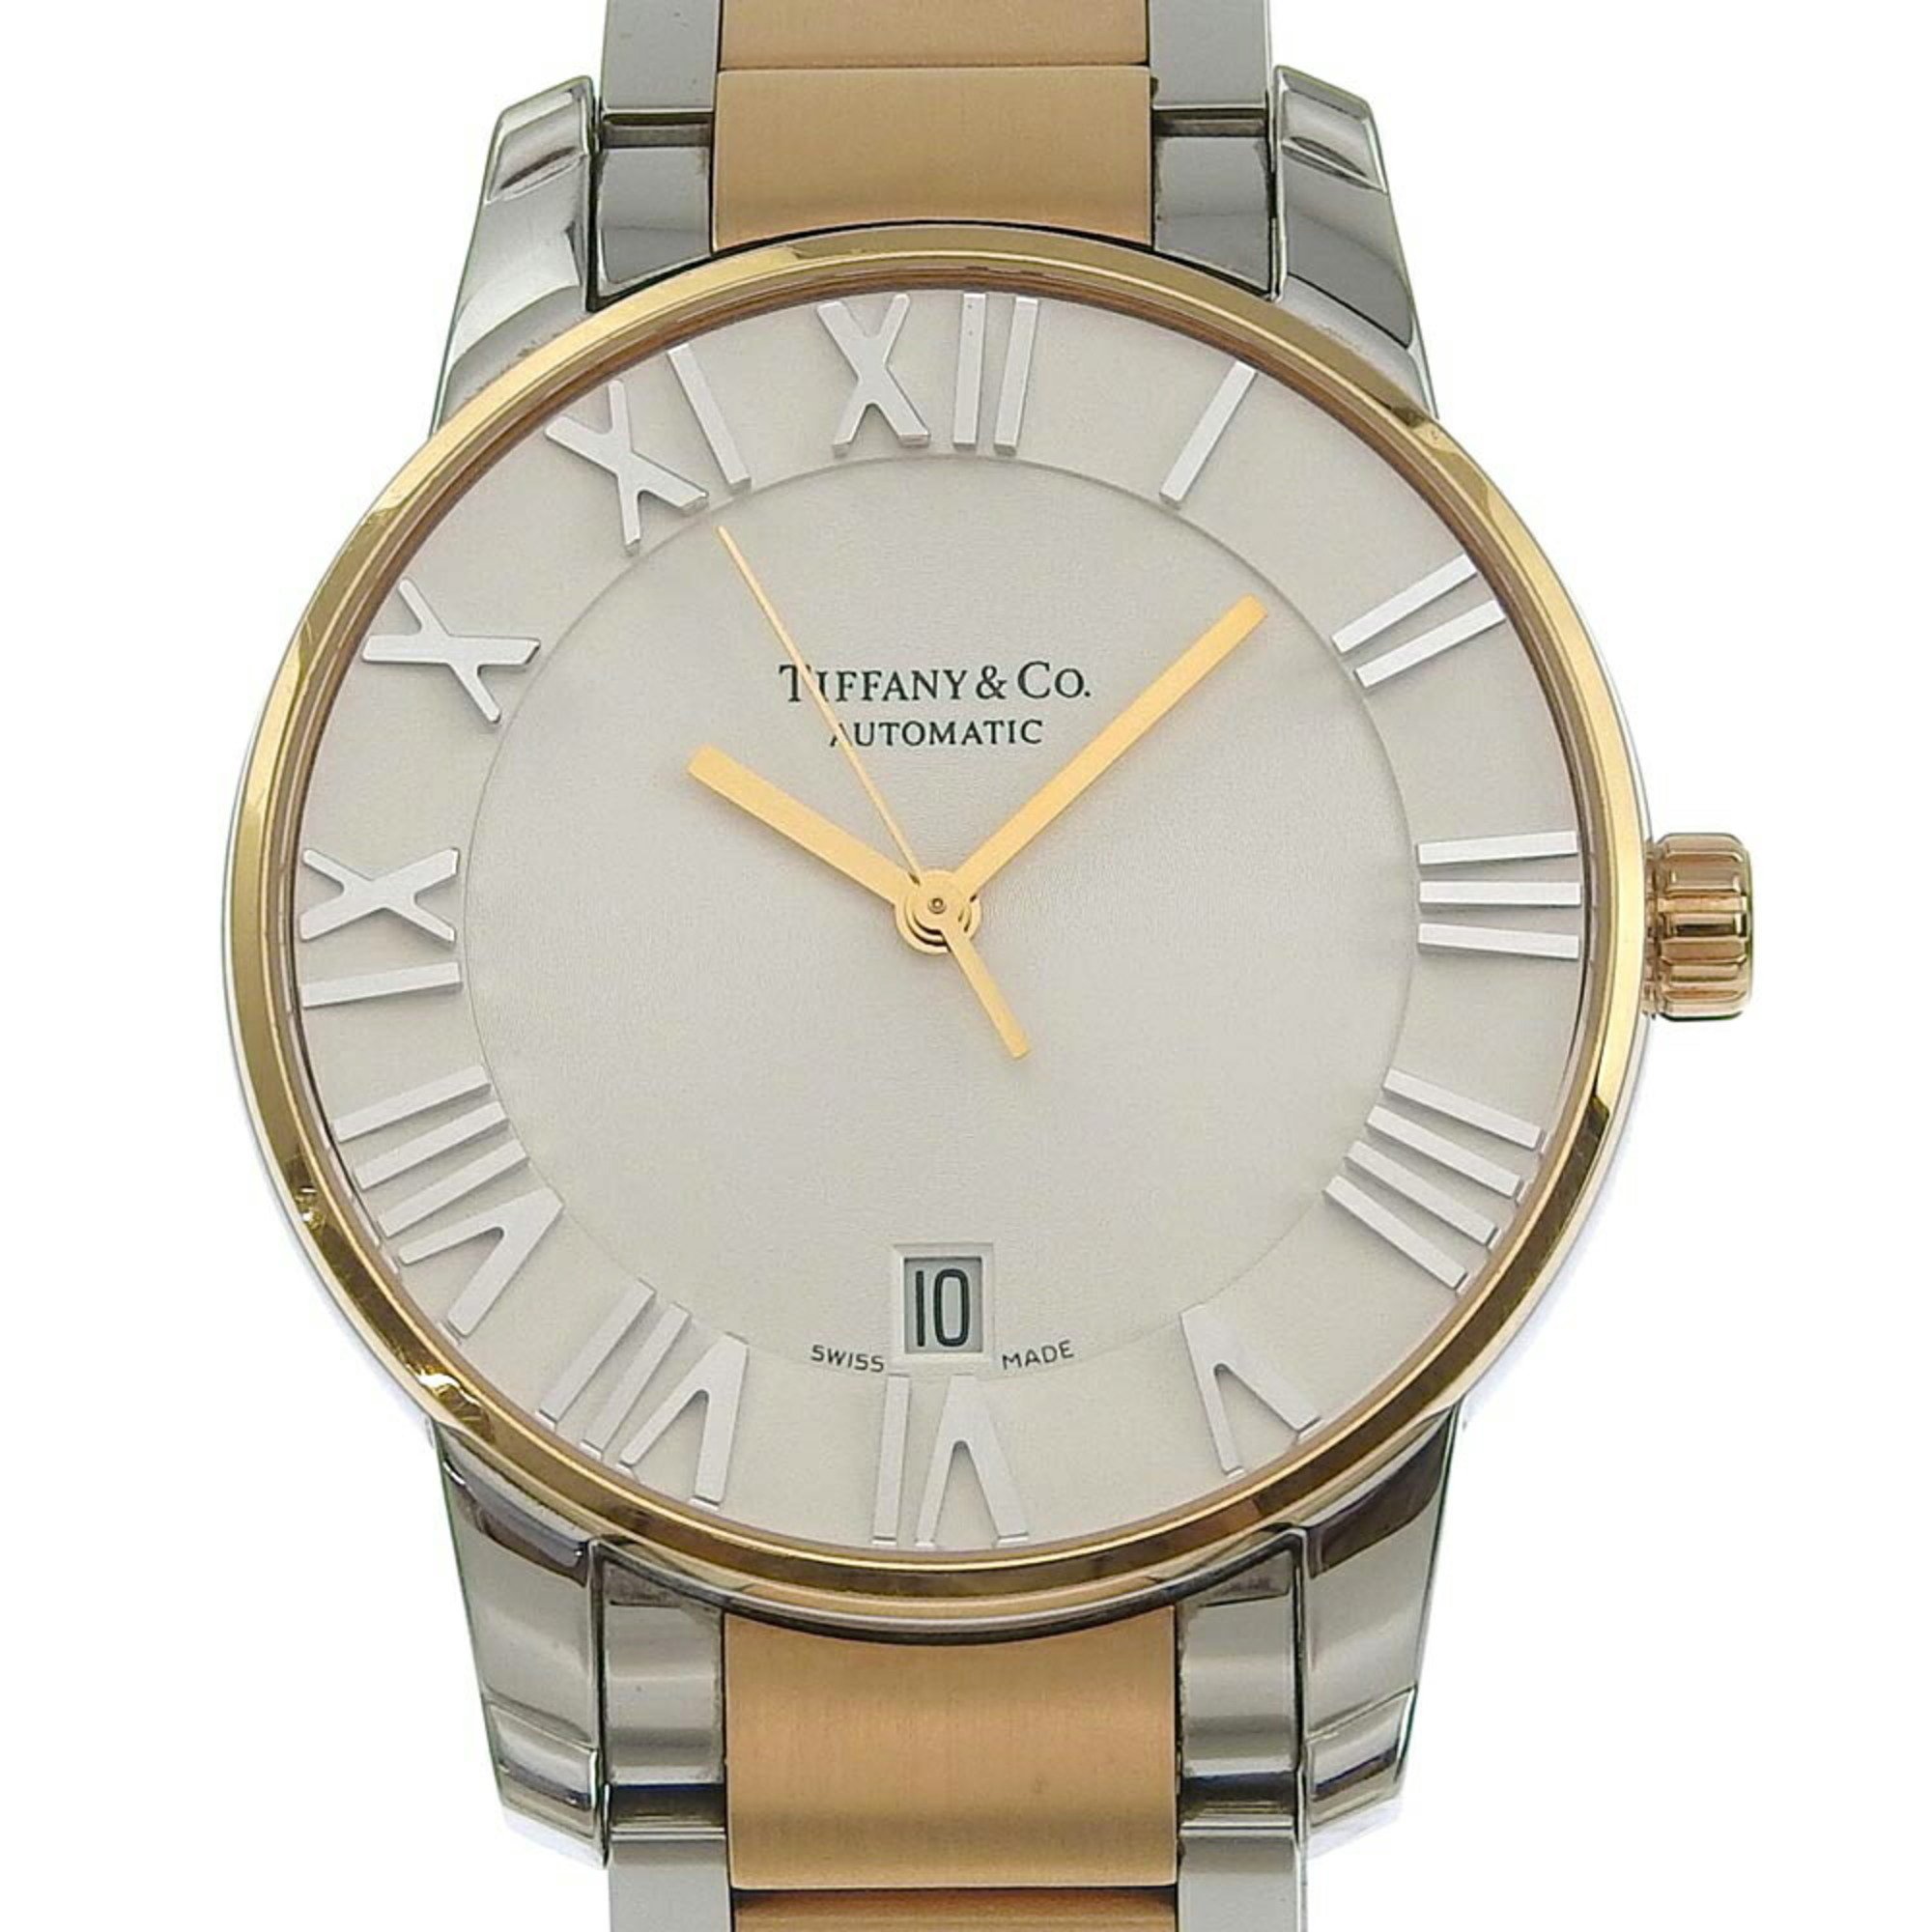 Tiffany TIFFANY&Co. Atlas Dome Watch Combi Date Z1800.68.13A21A00A Stainless Steel x K18 Pink Gold Swiss Made Silver/Gold Automatic Winding White Dial Men's